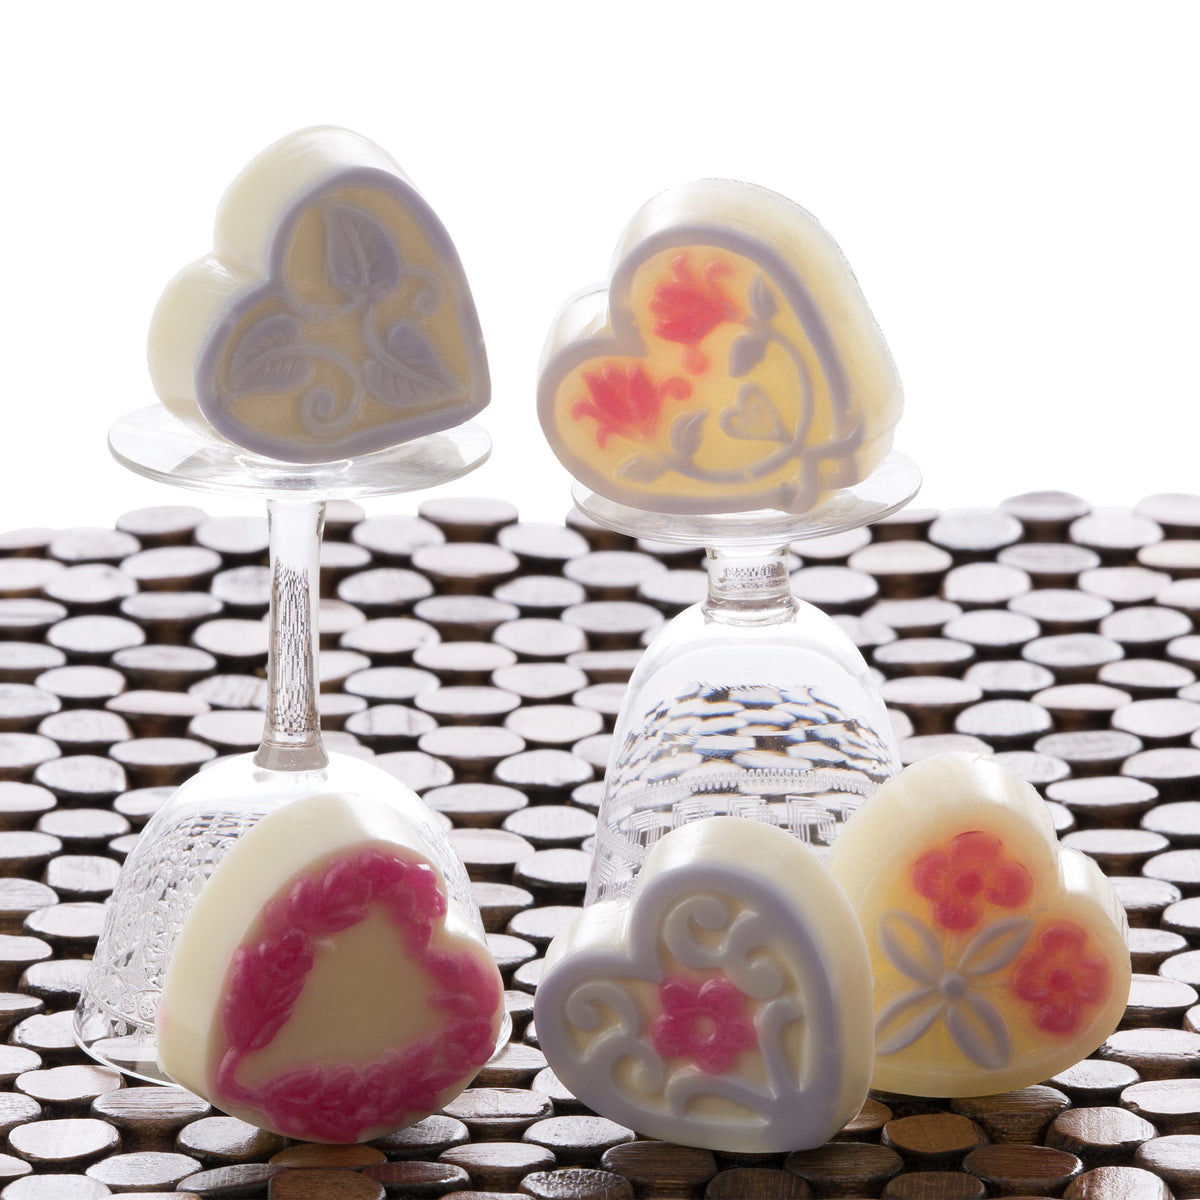 Guest 5 Hearts Soap Mold